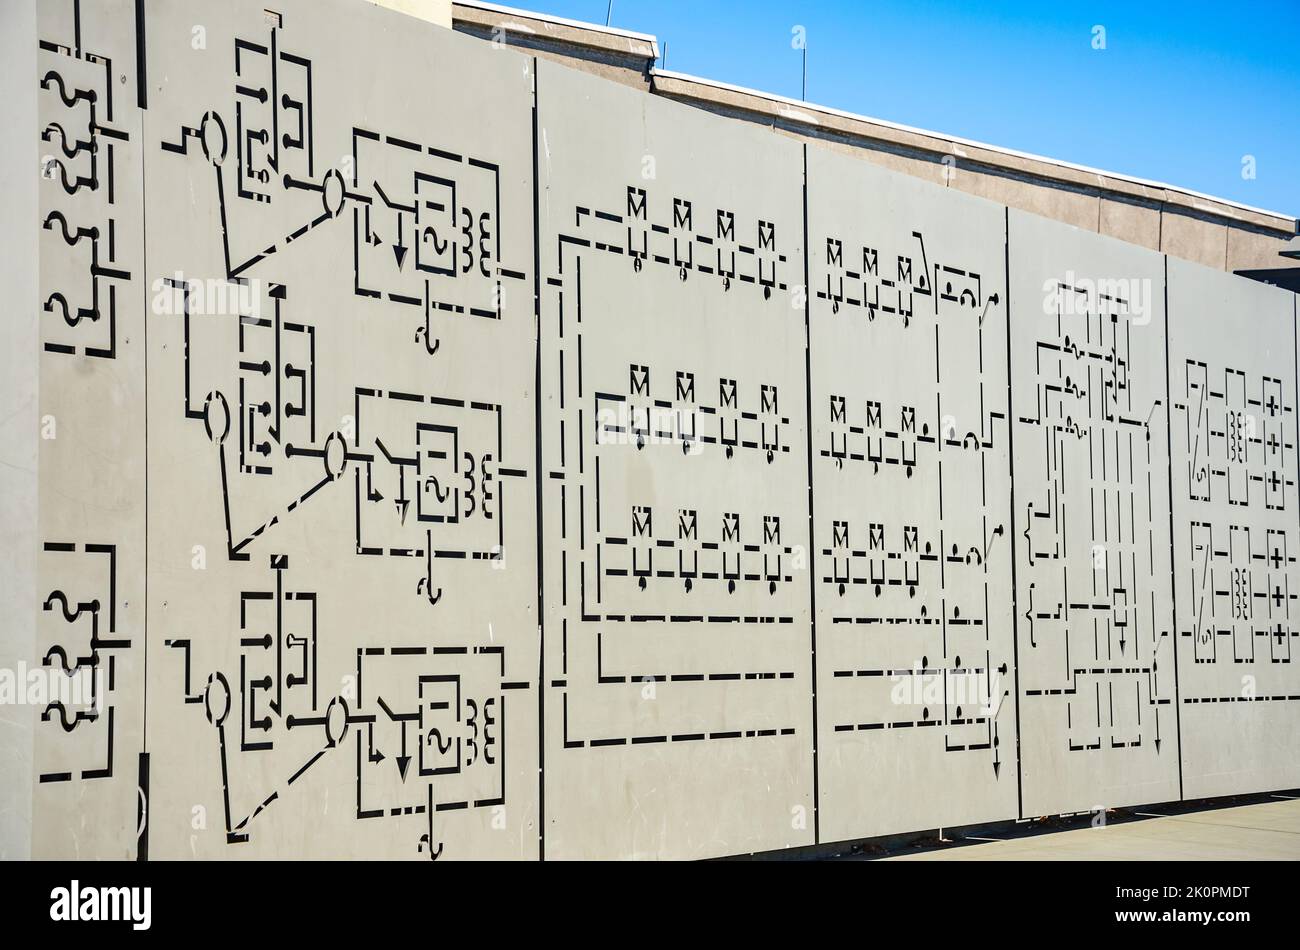 The Electric Utility Wall is a publicly displayed exhibit outside Exploratorium at Pier 15/17 in San Francisco, California Stock Photo